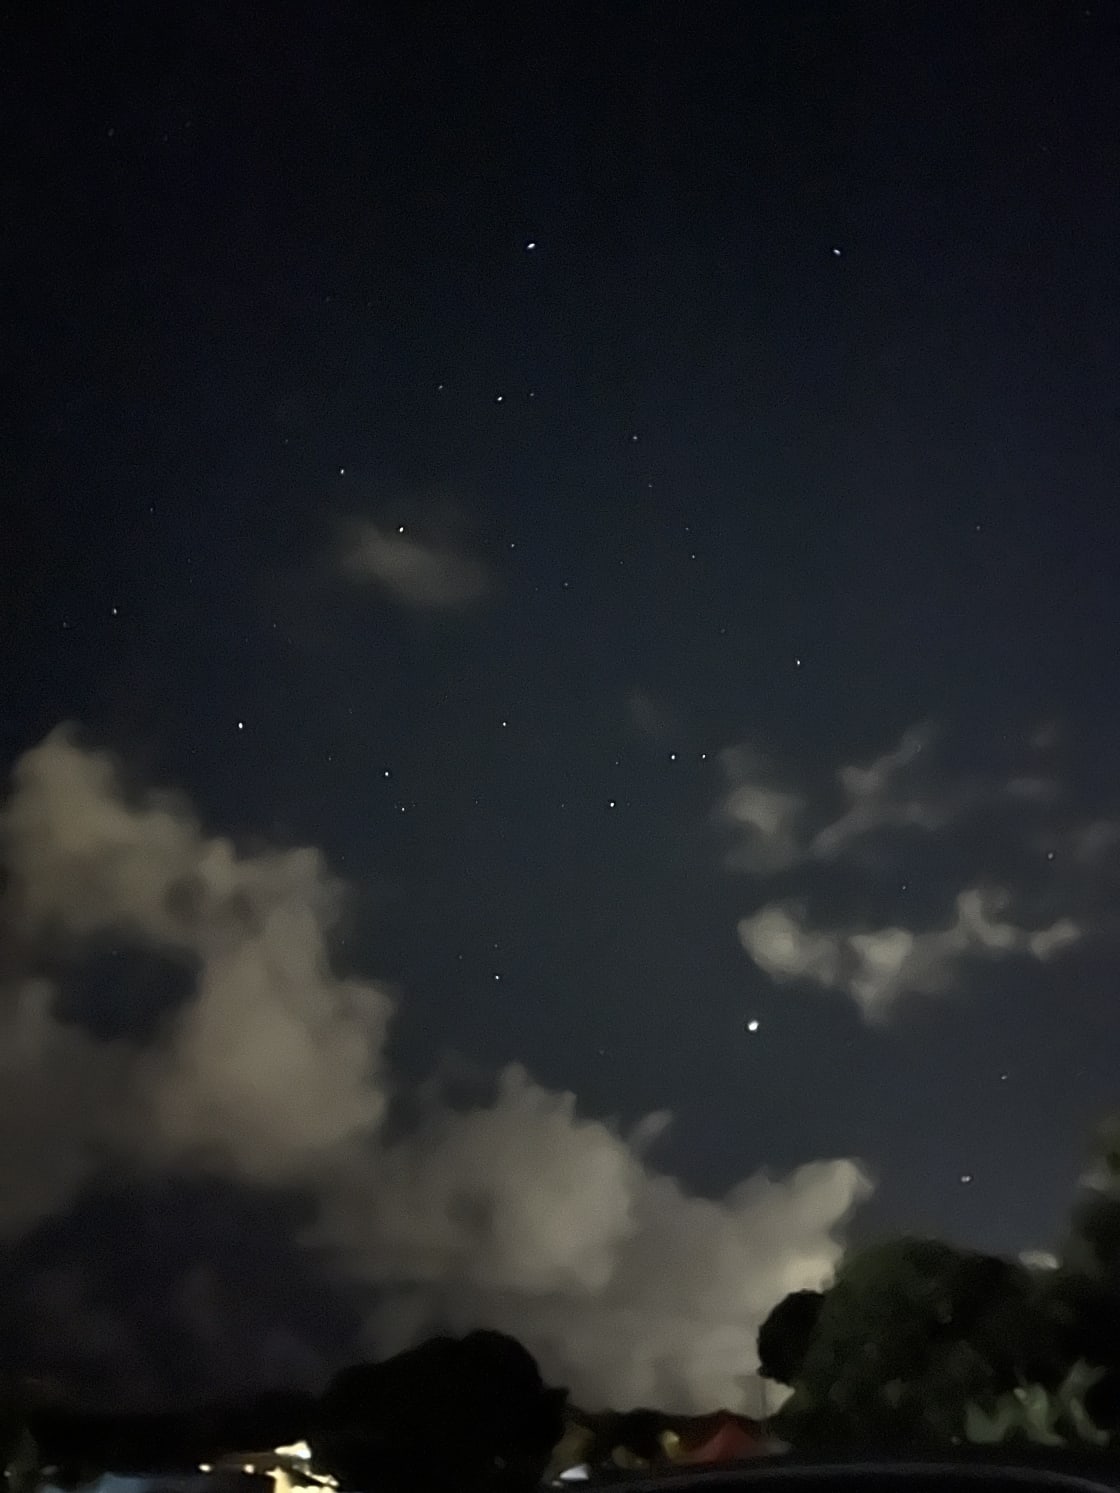 It was cloudy and the stars were still breath taking! 